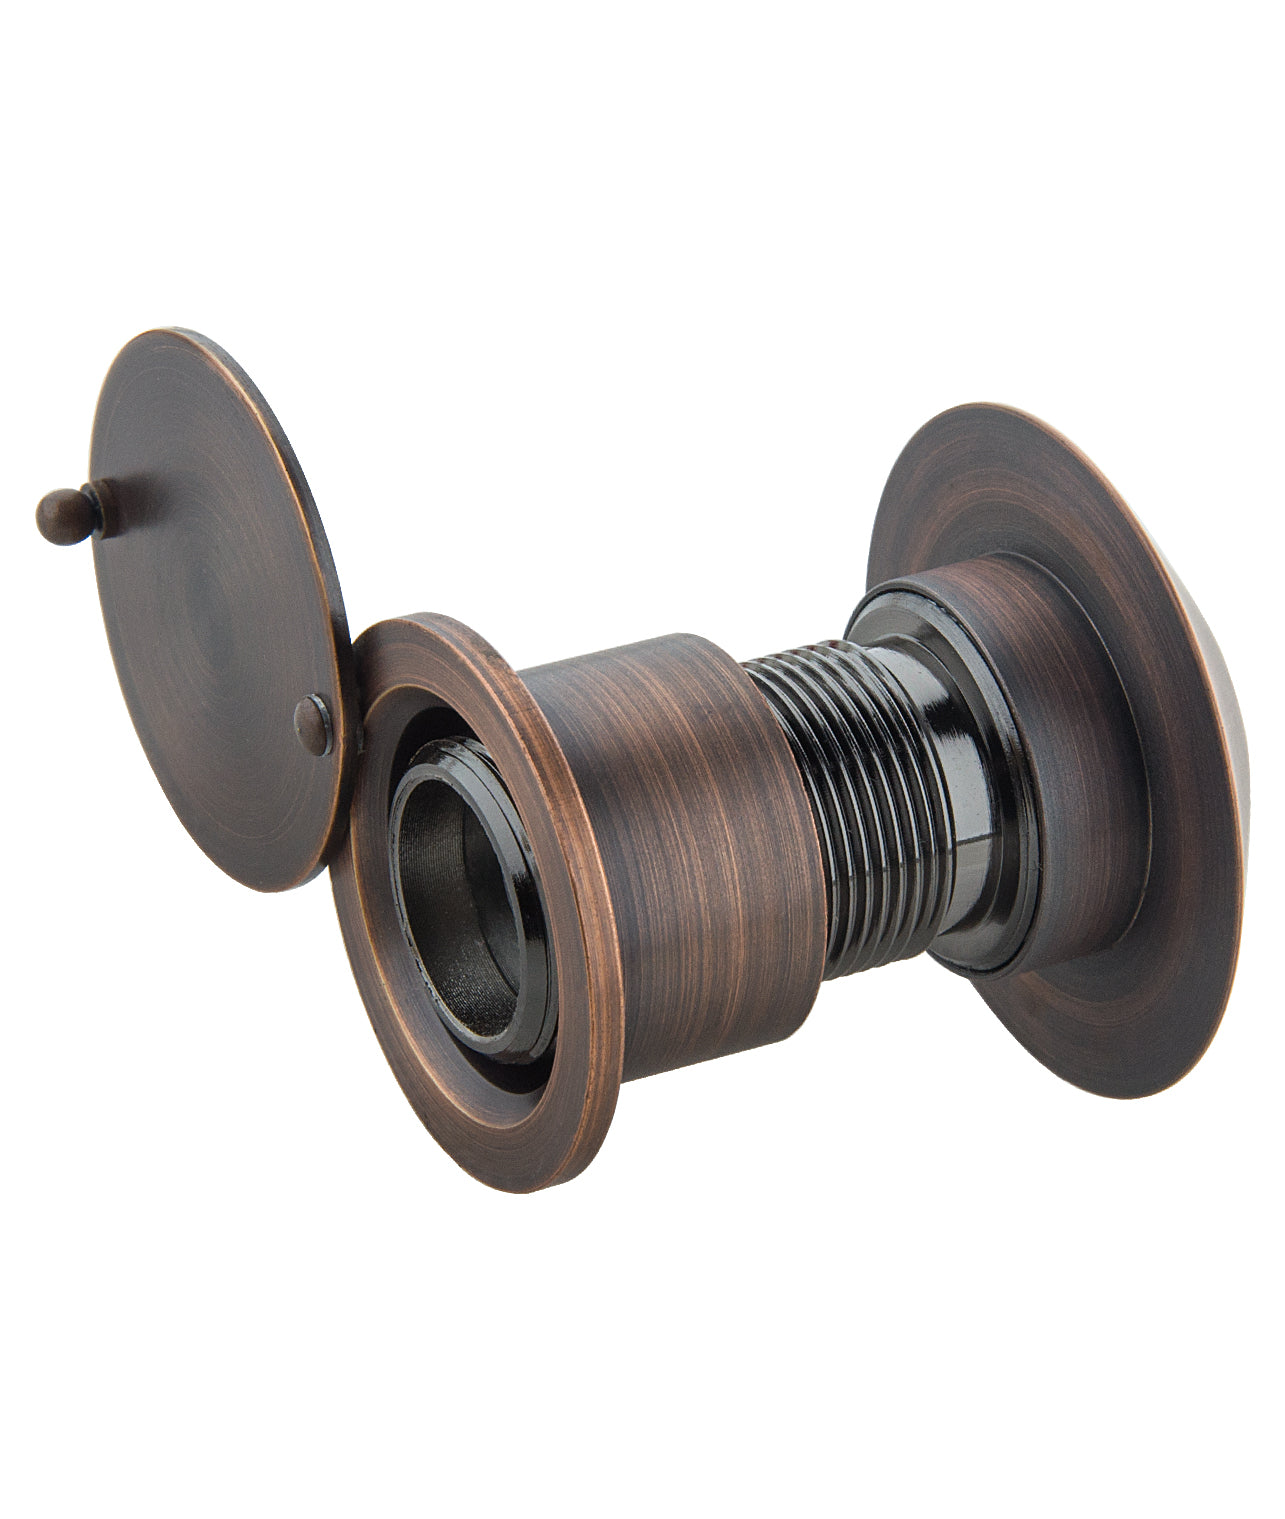 Solid Brass Security Large Peepholes for Front Door - Oil Rubbed Bronze